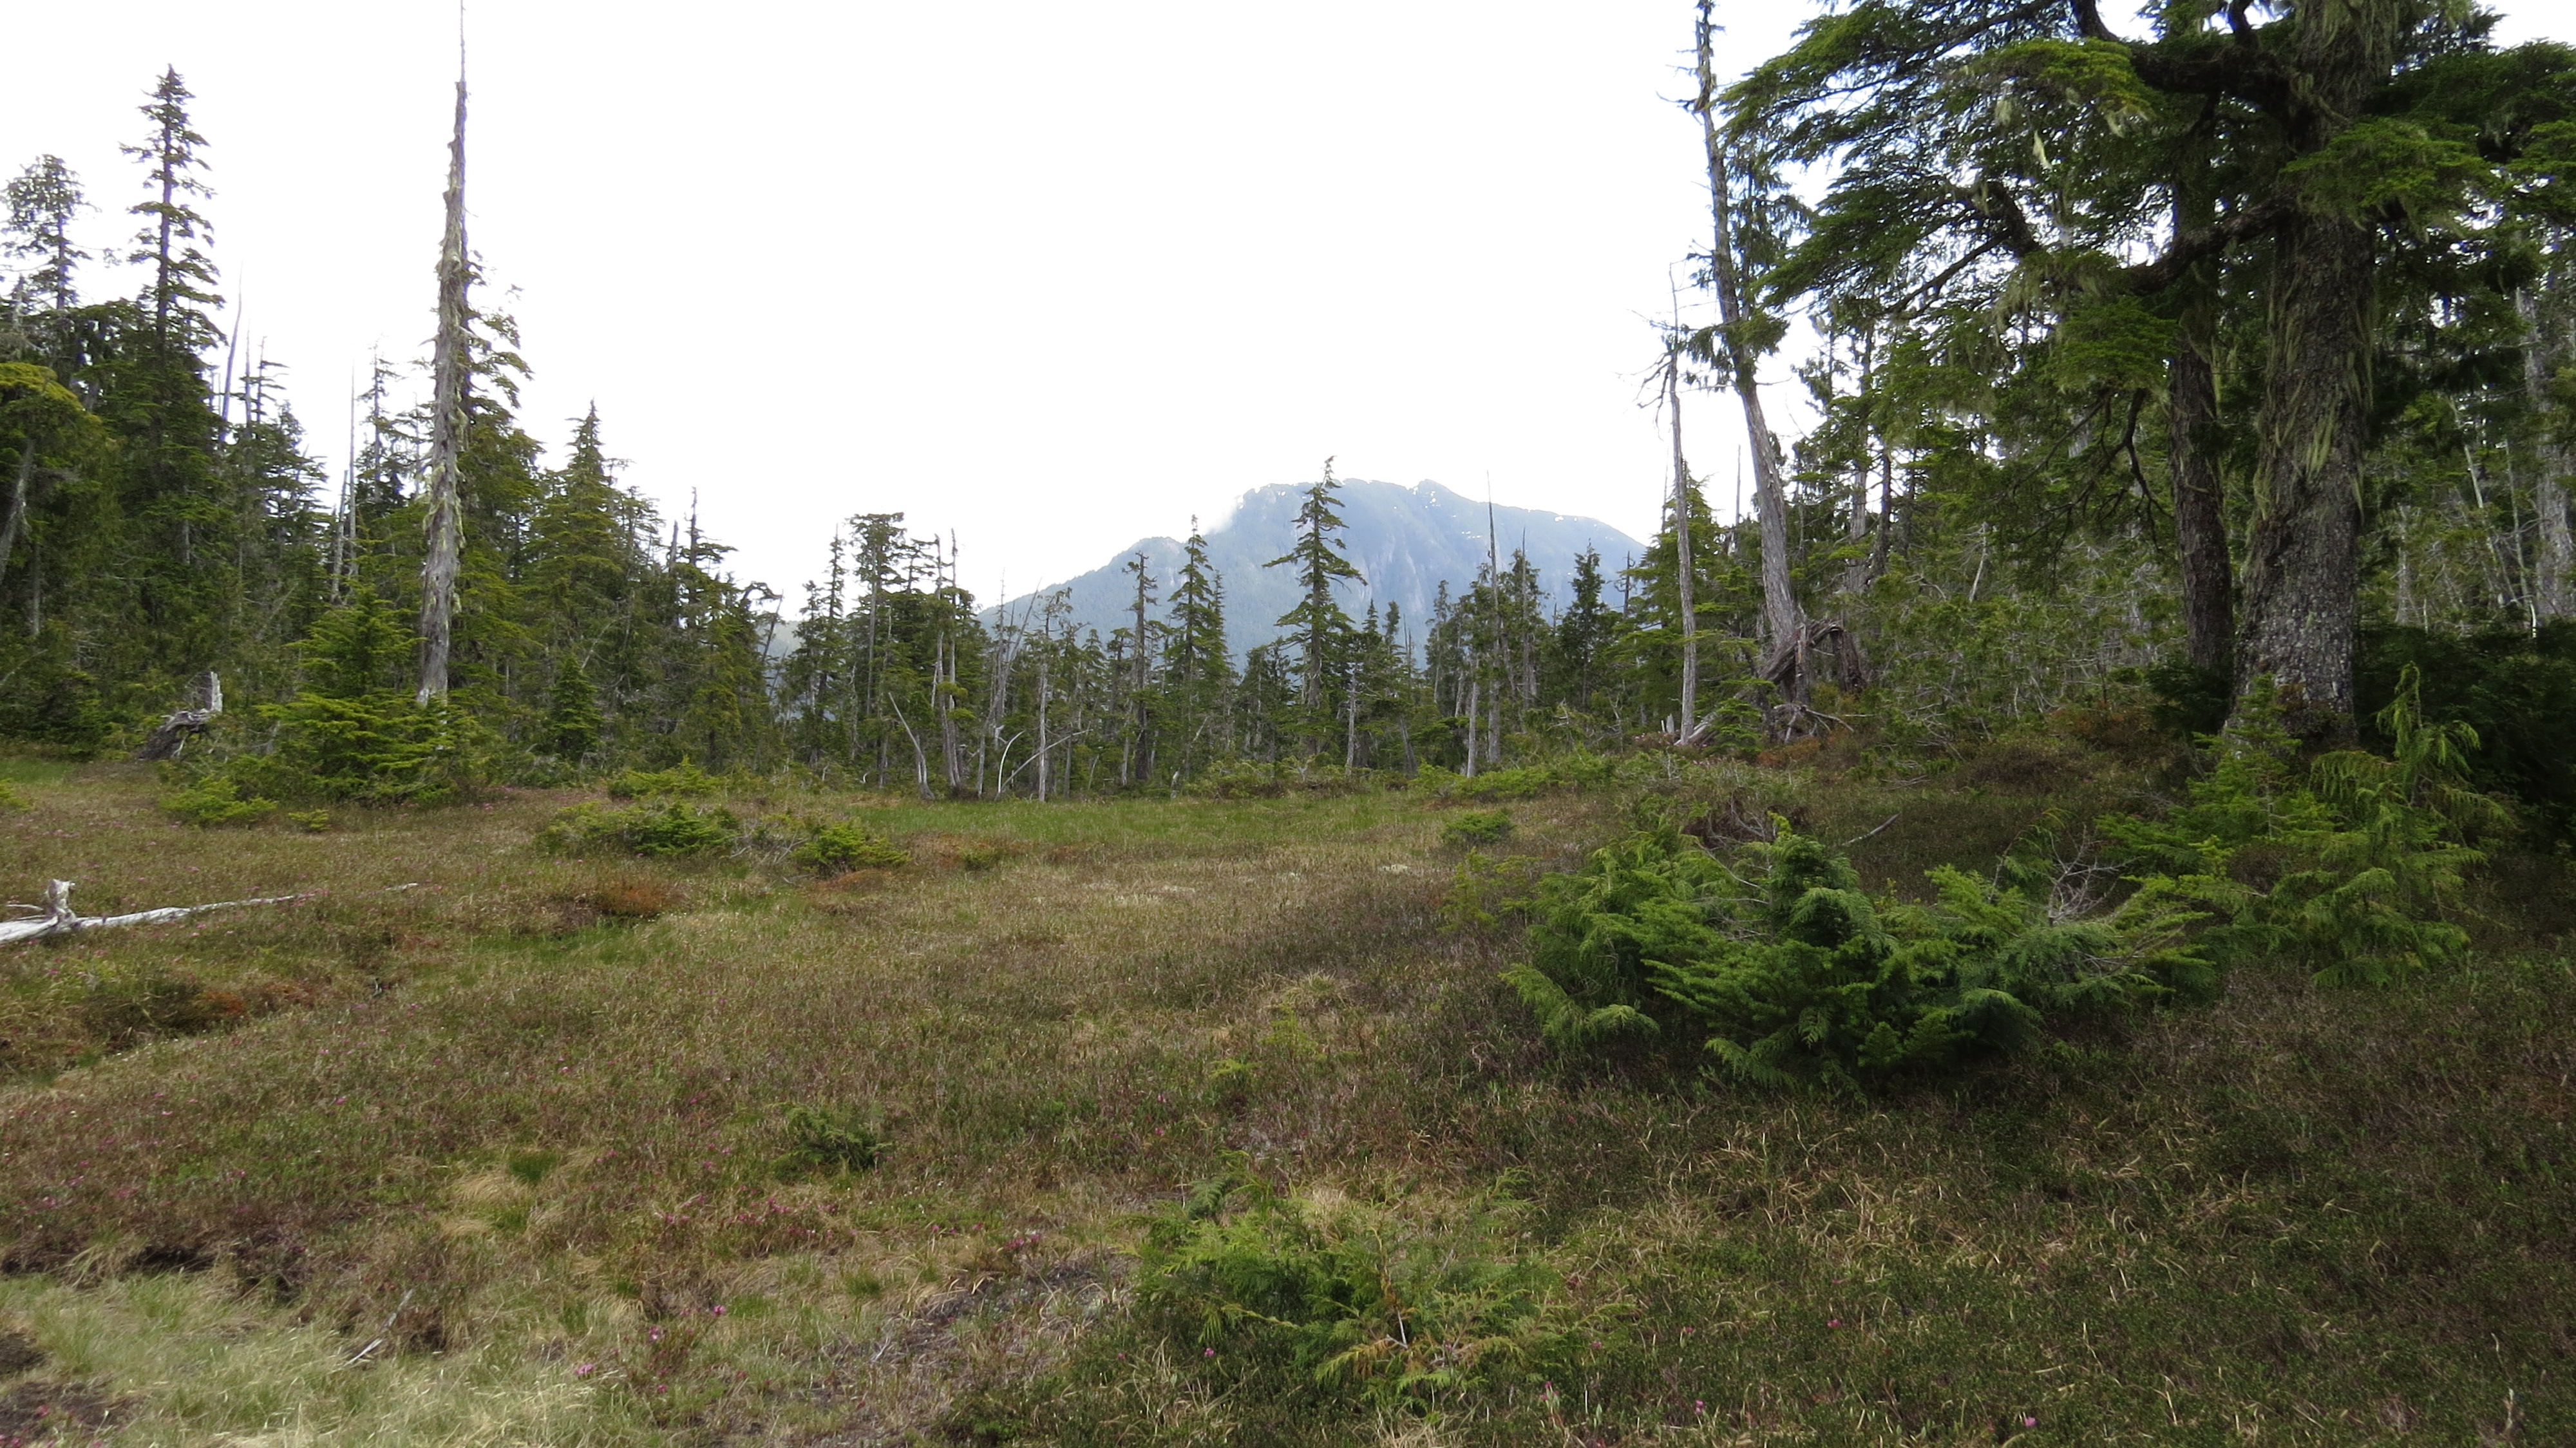 Bog ecosystem with BCTS road proposed through it in Schmidt Creek